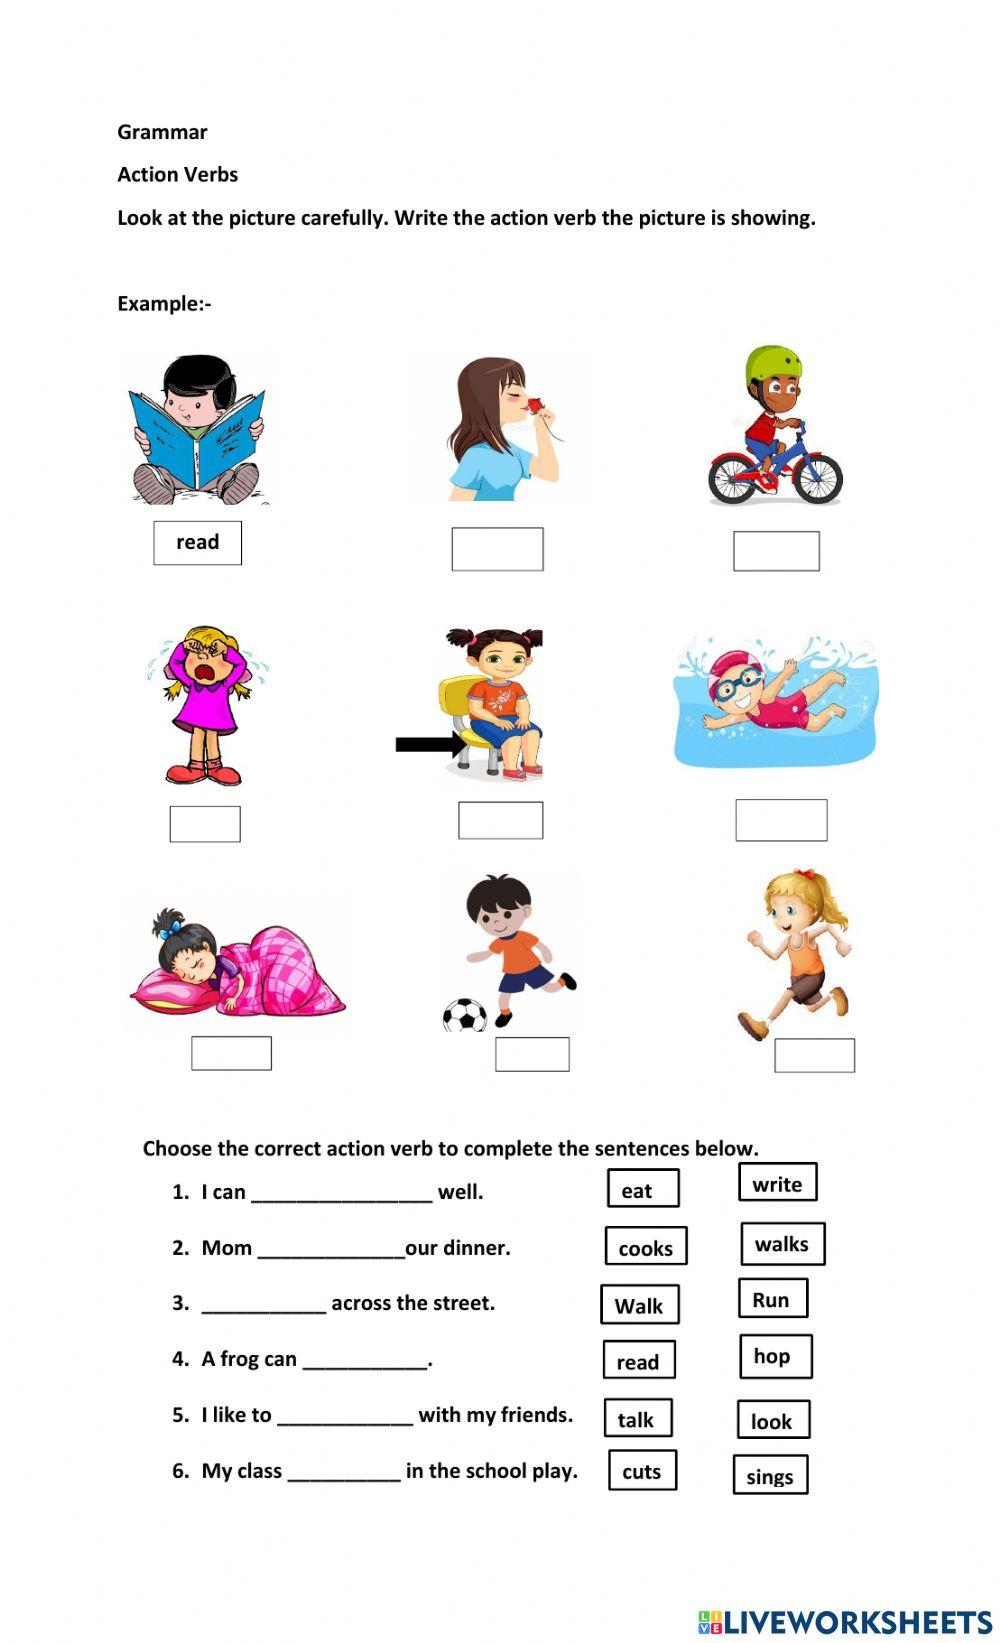 action-verbs-online-exercise-for-grade-1-live-worksheets